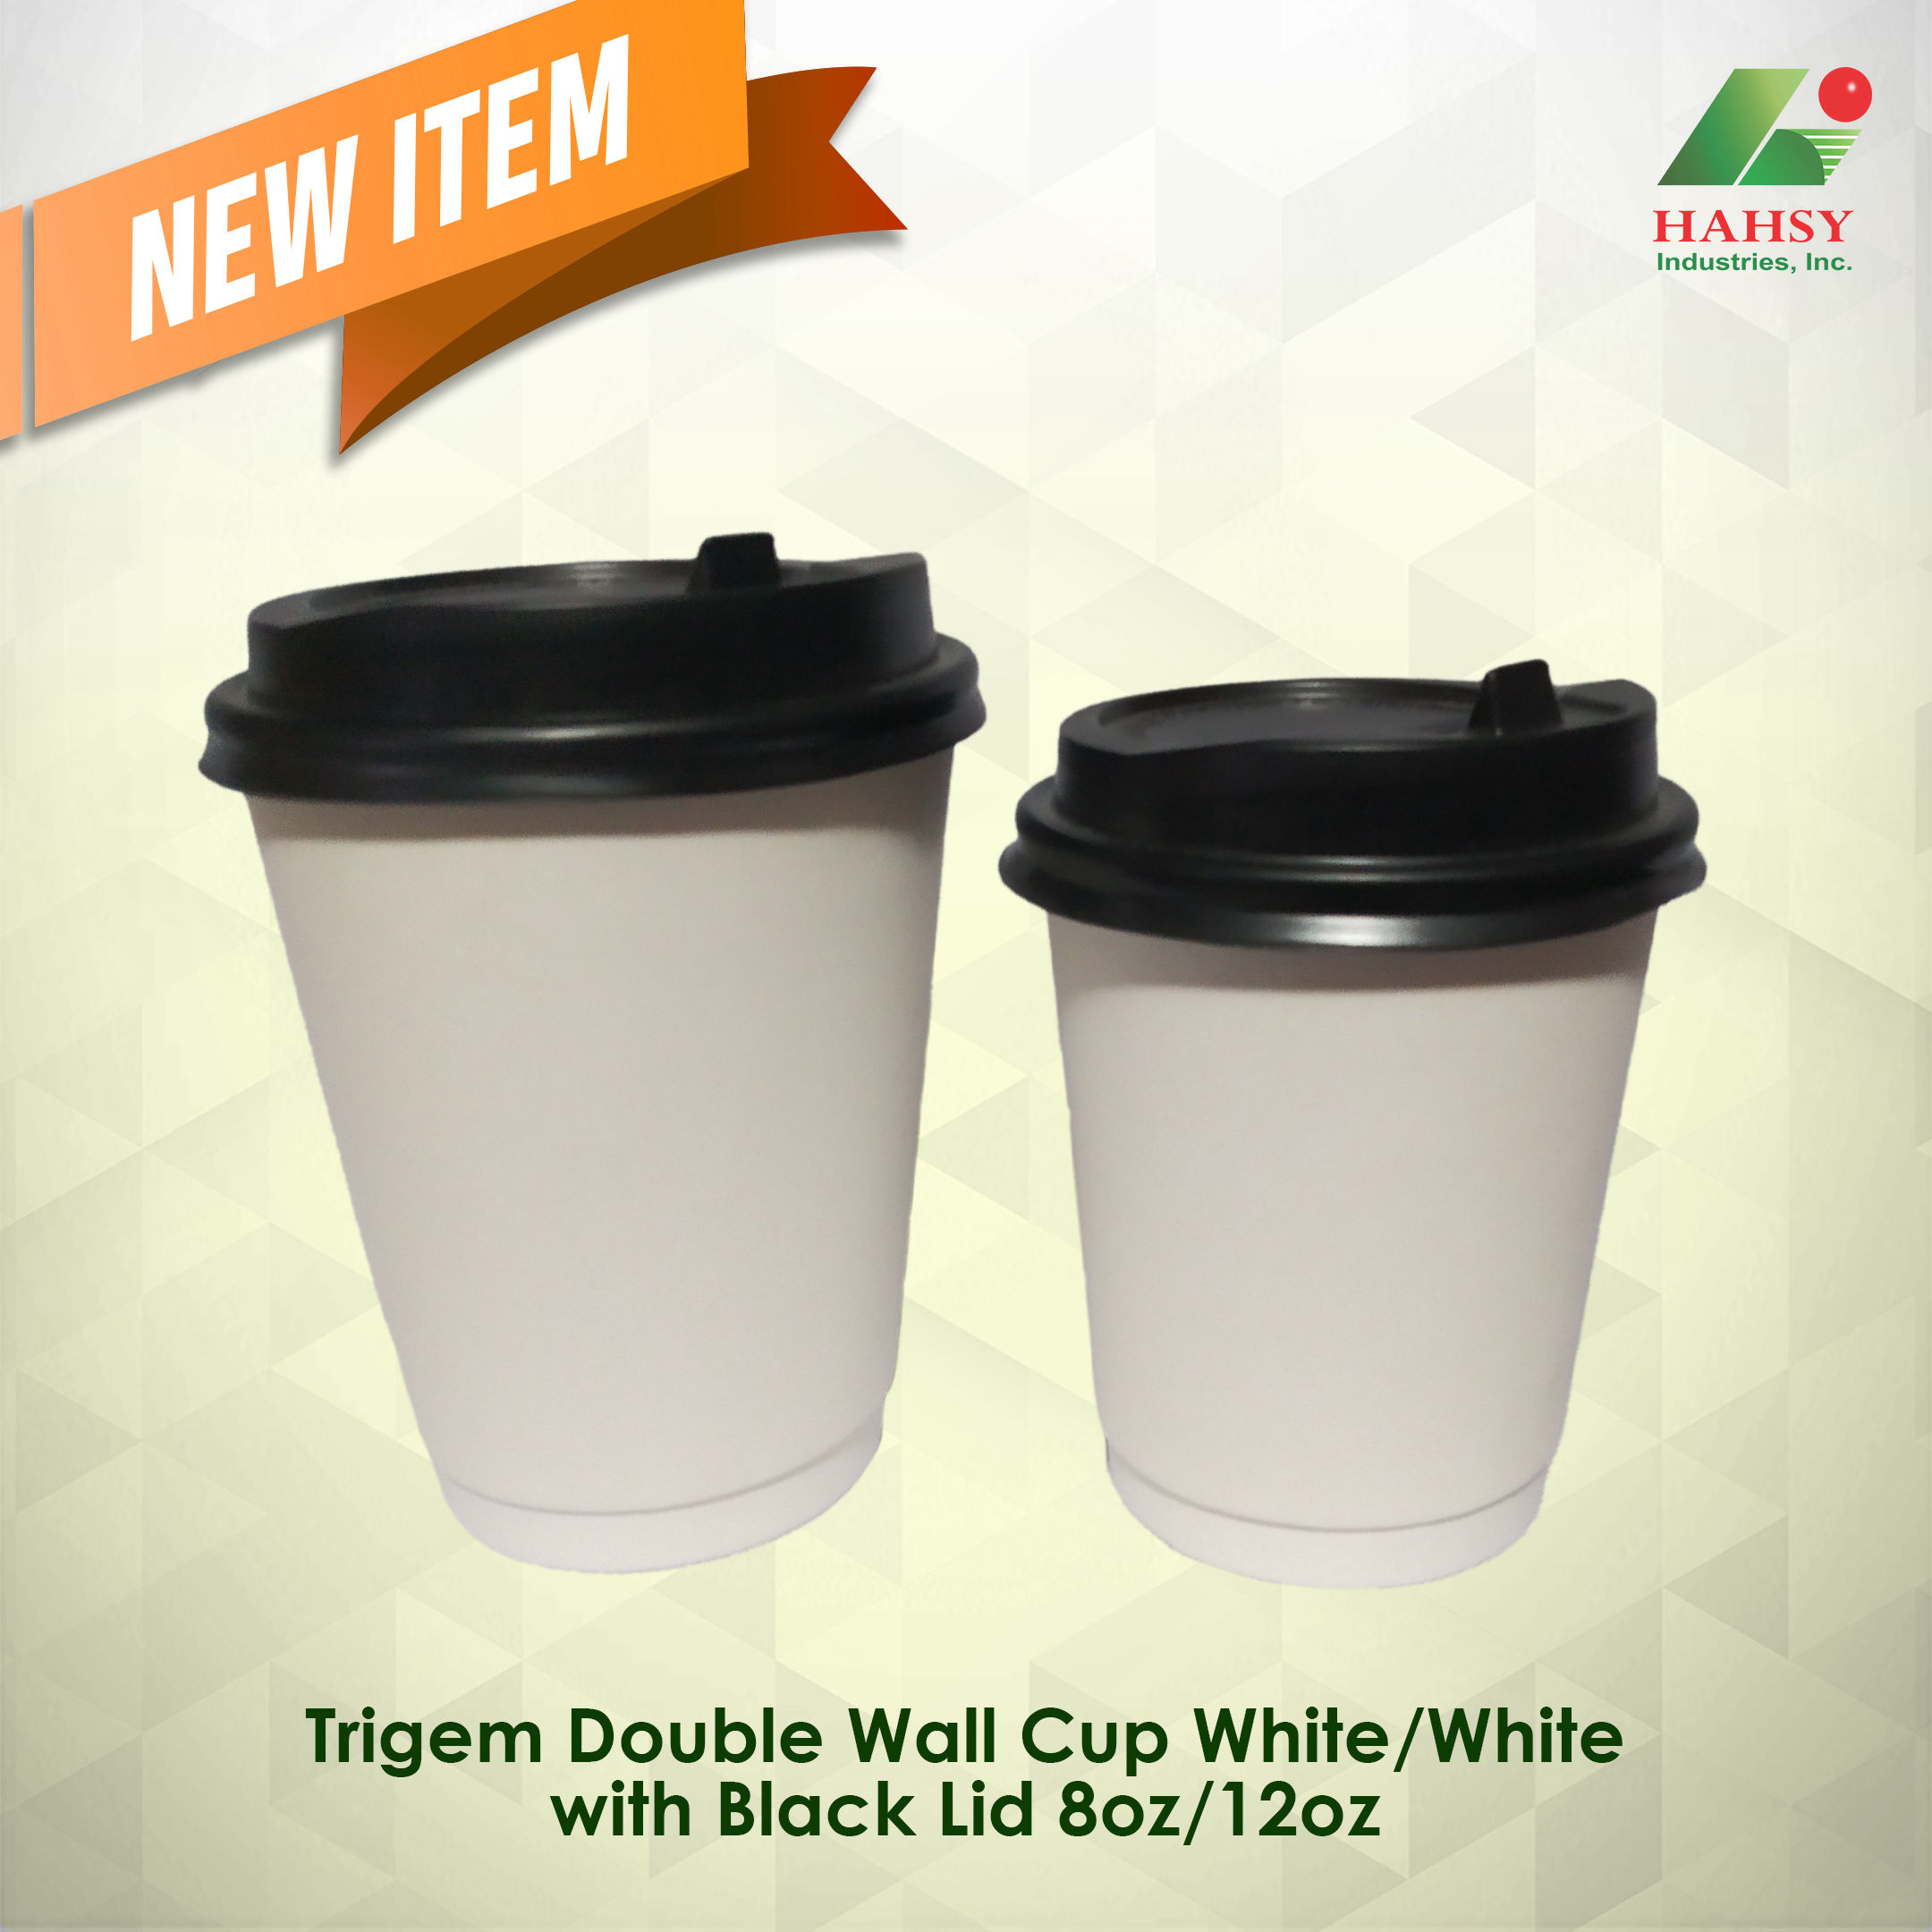 Trigem Double wall cup white with black lid 8oz 12oz